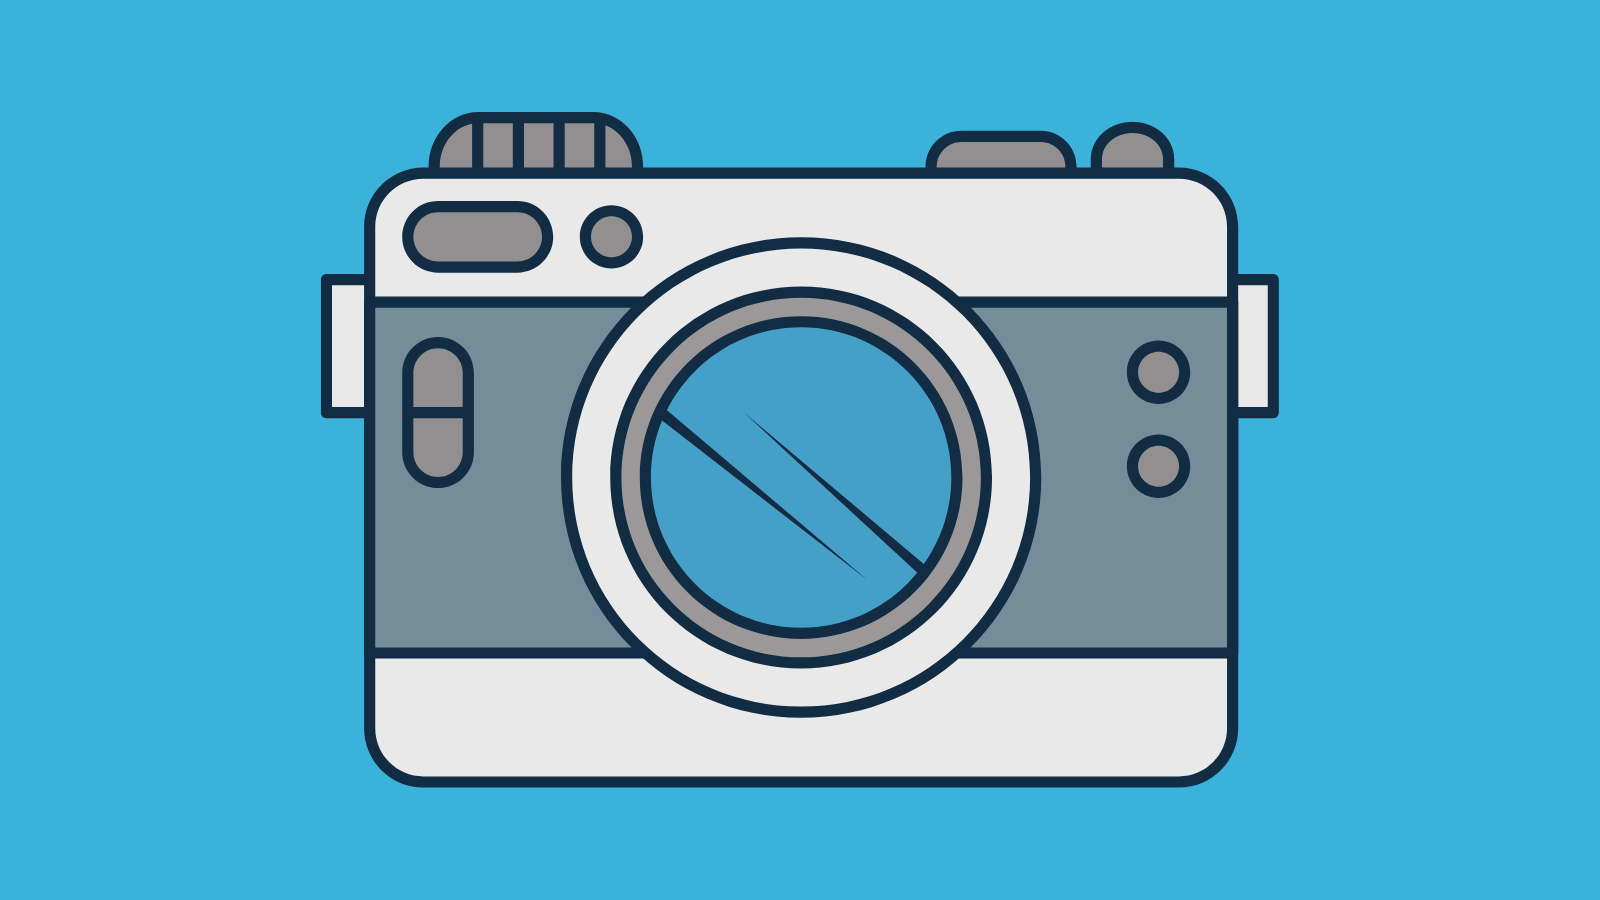 An illustration of a camera